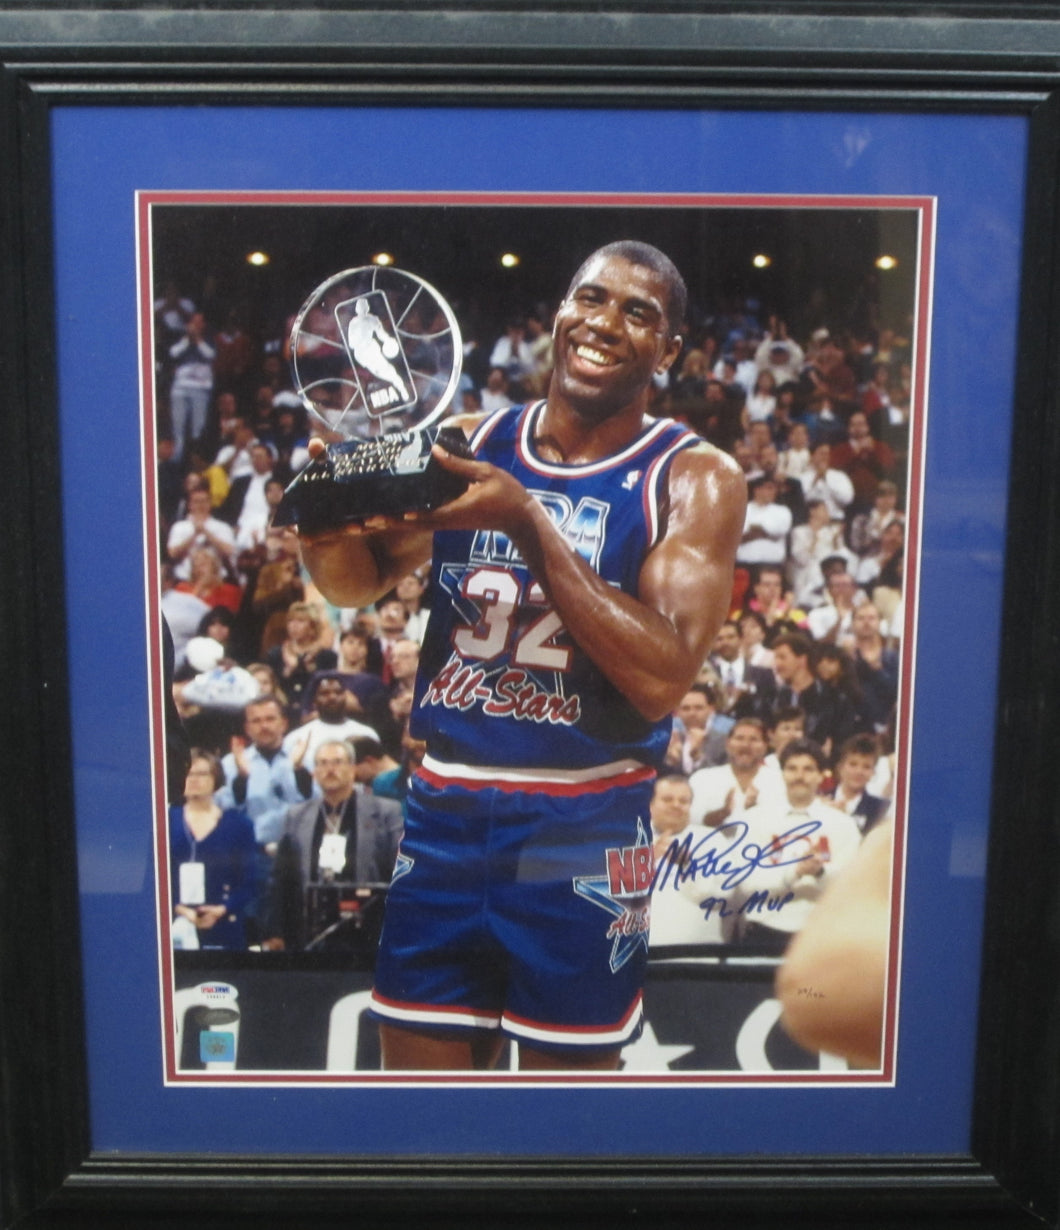 NBA All-Star Magic Johnson Signed 16x20 Photo with 92 MVP Inscription Framed & Matted with PSA COA